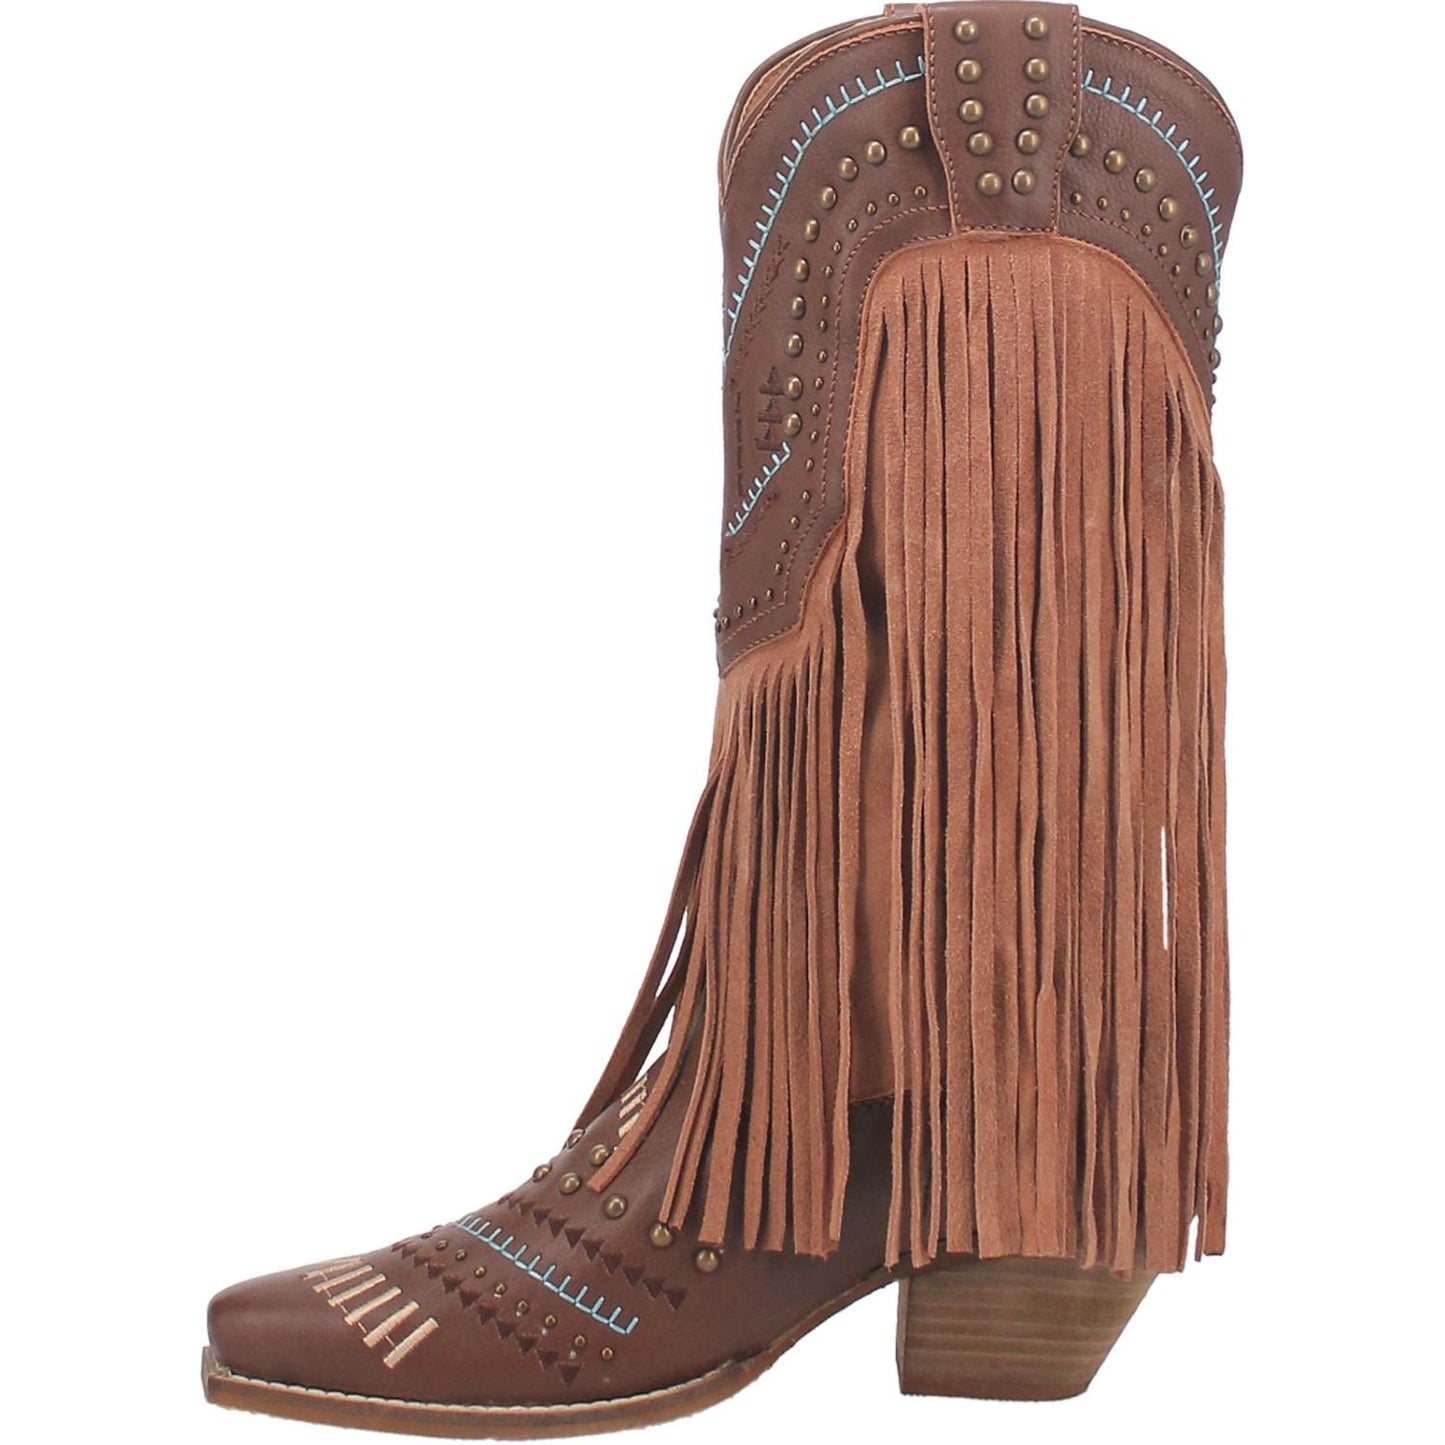 Dingo Gypsy Brown Boot